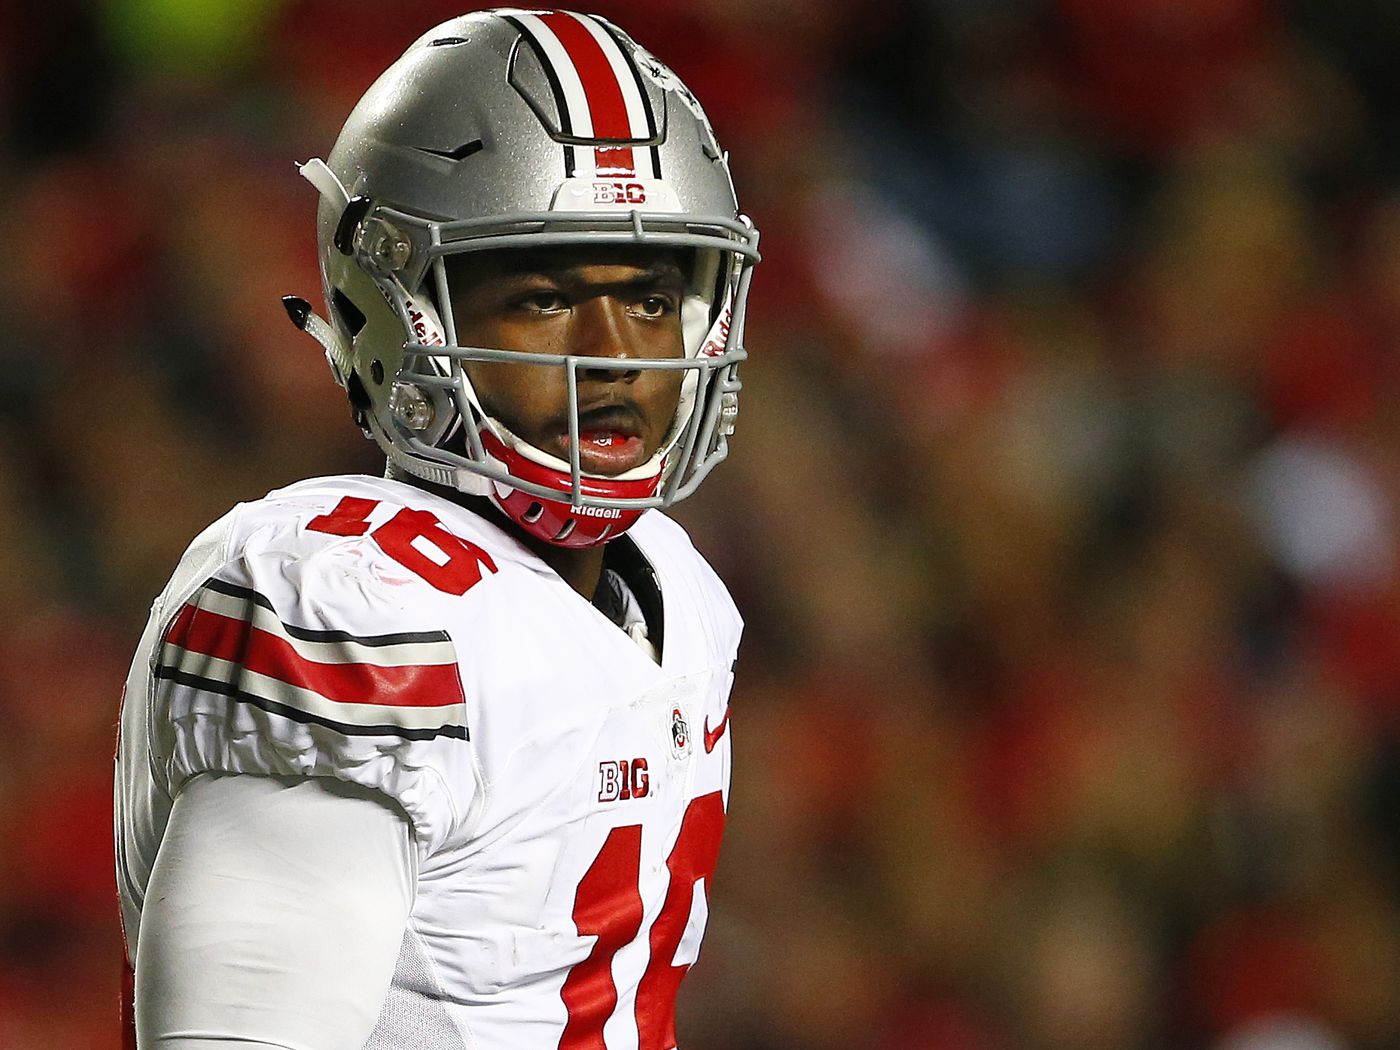 Ohio state starting qb jt barrett suspended game for driving impaired